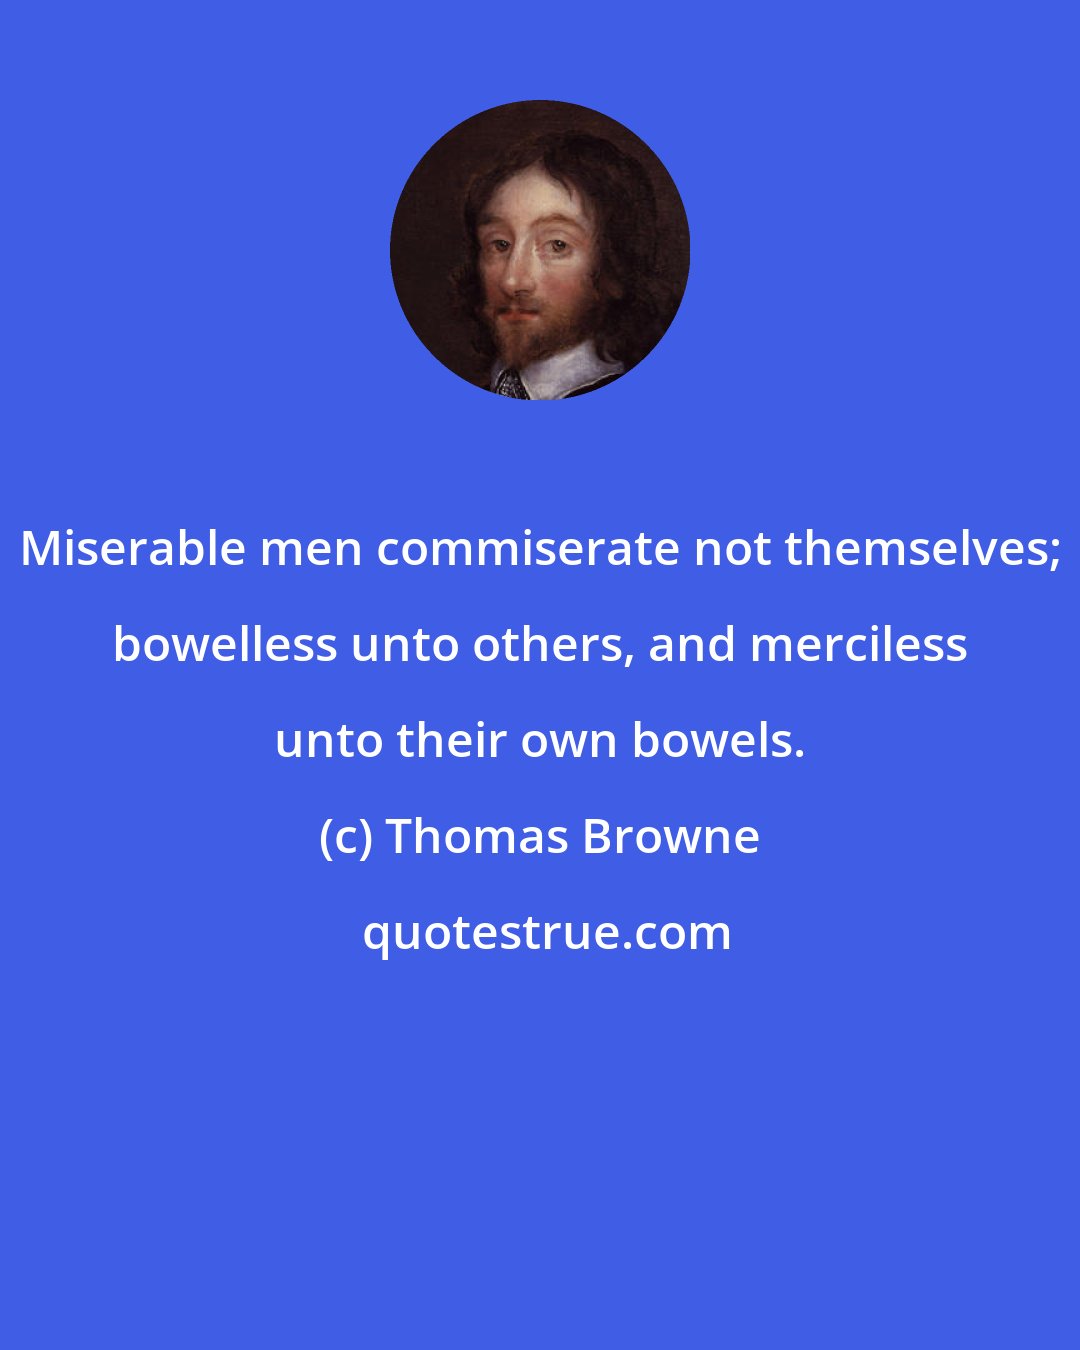 Thomas Browne: Miserable men commiserate not themselves; bowelless unto others, and merciless unto their own bowels.